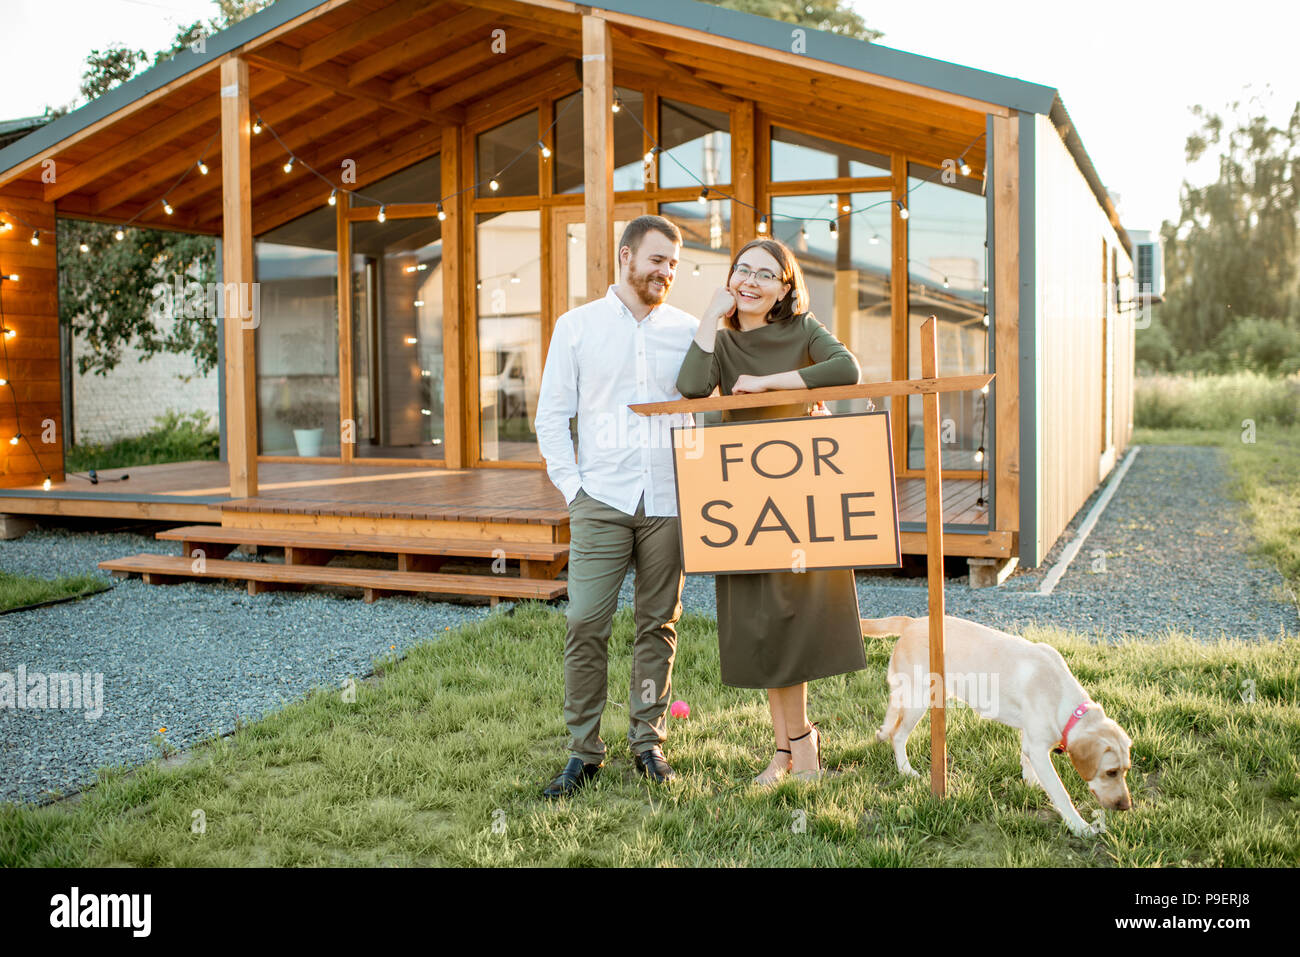 Couple selling country house Stock Photo